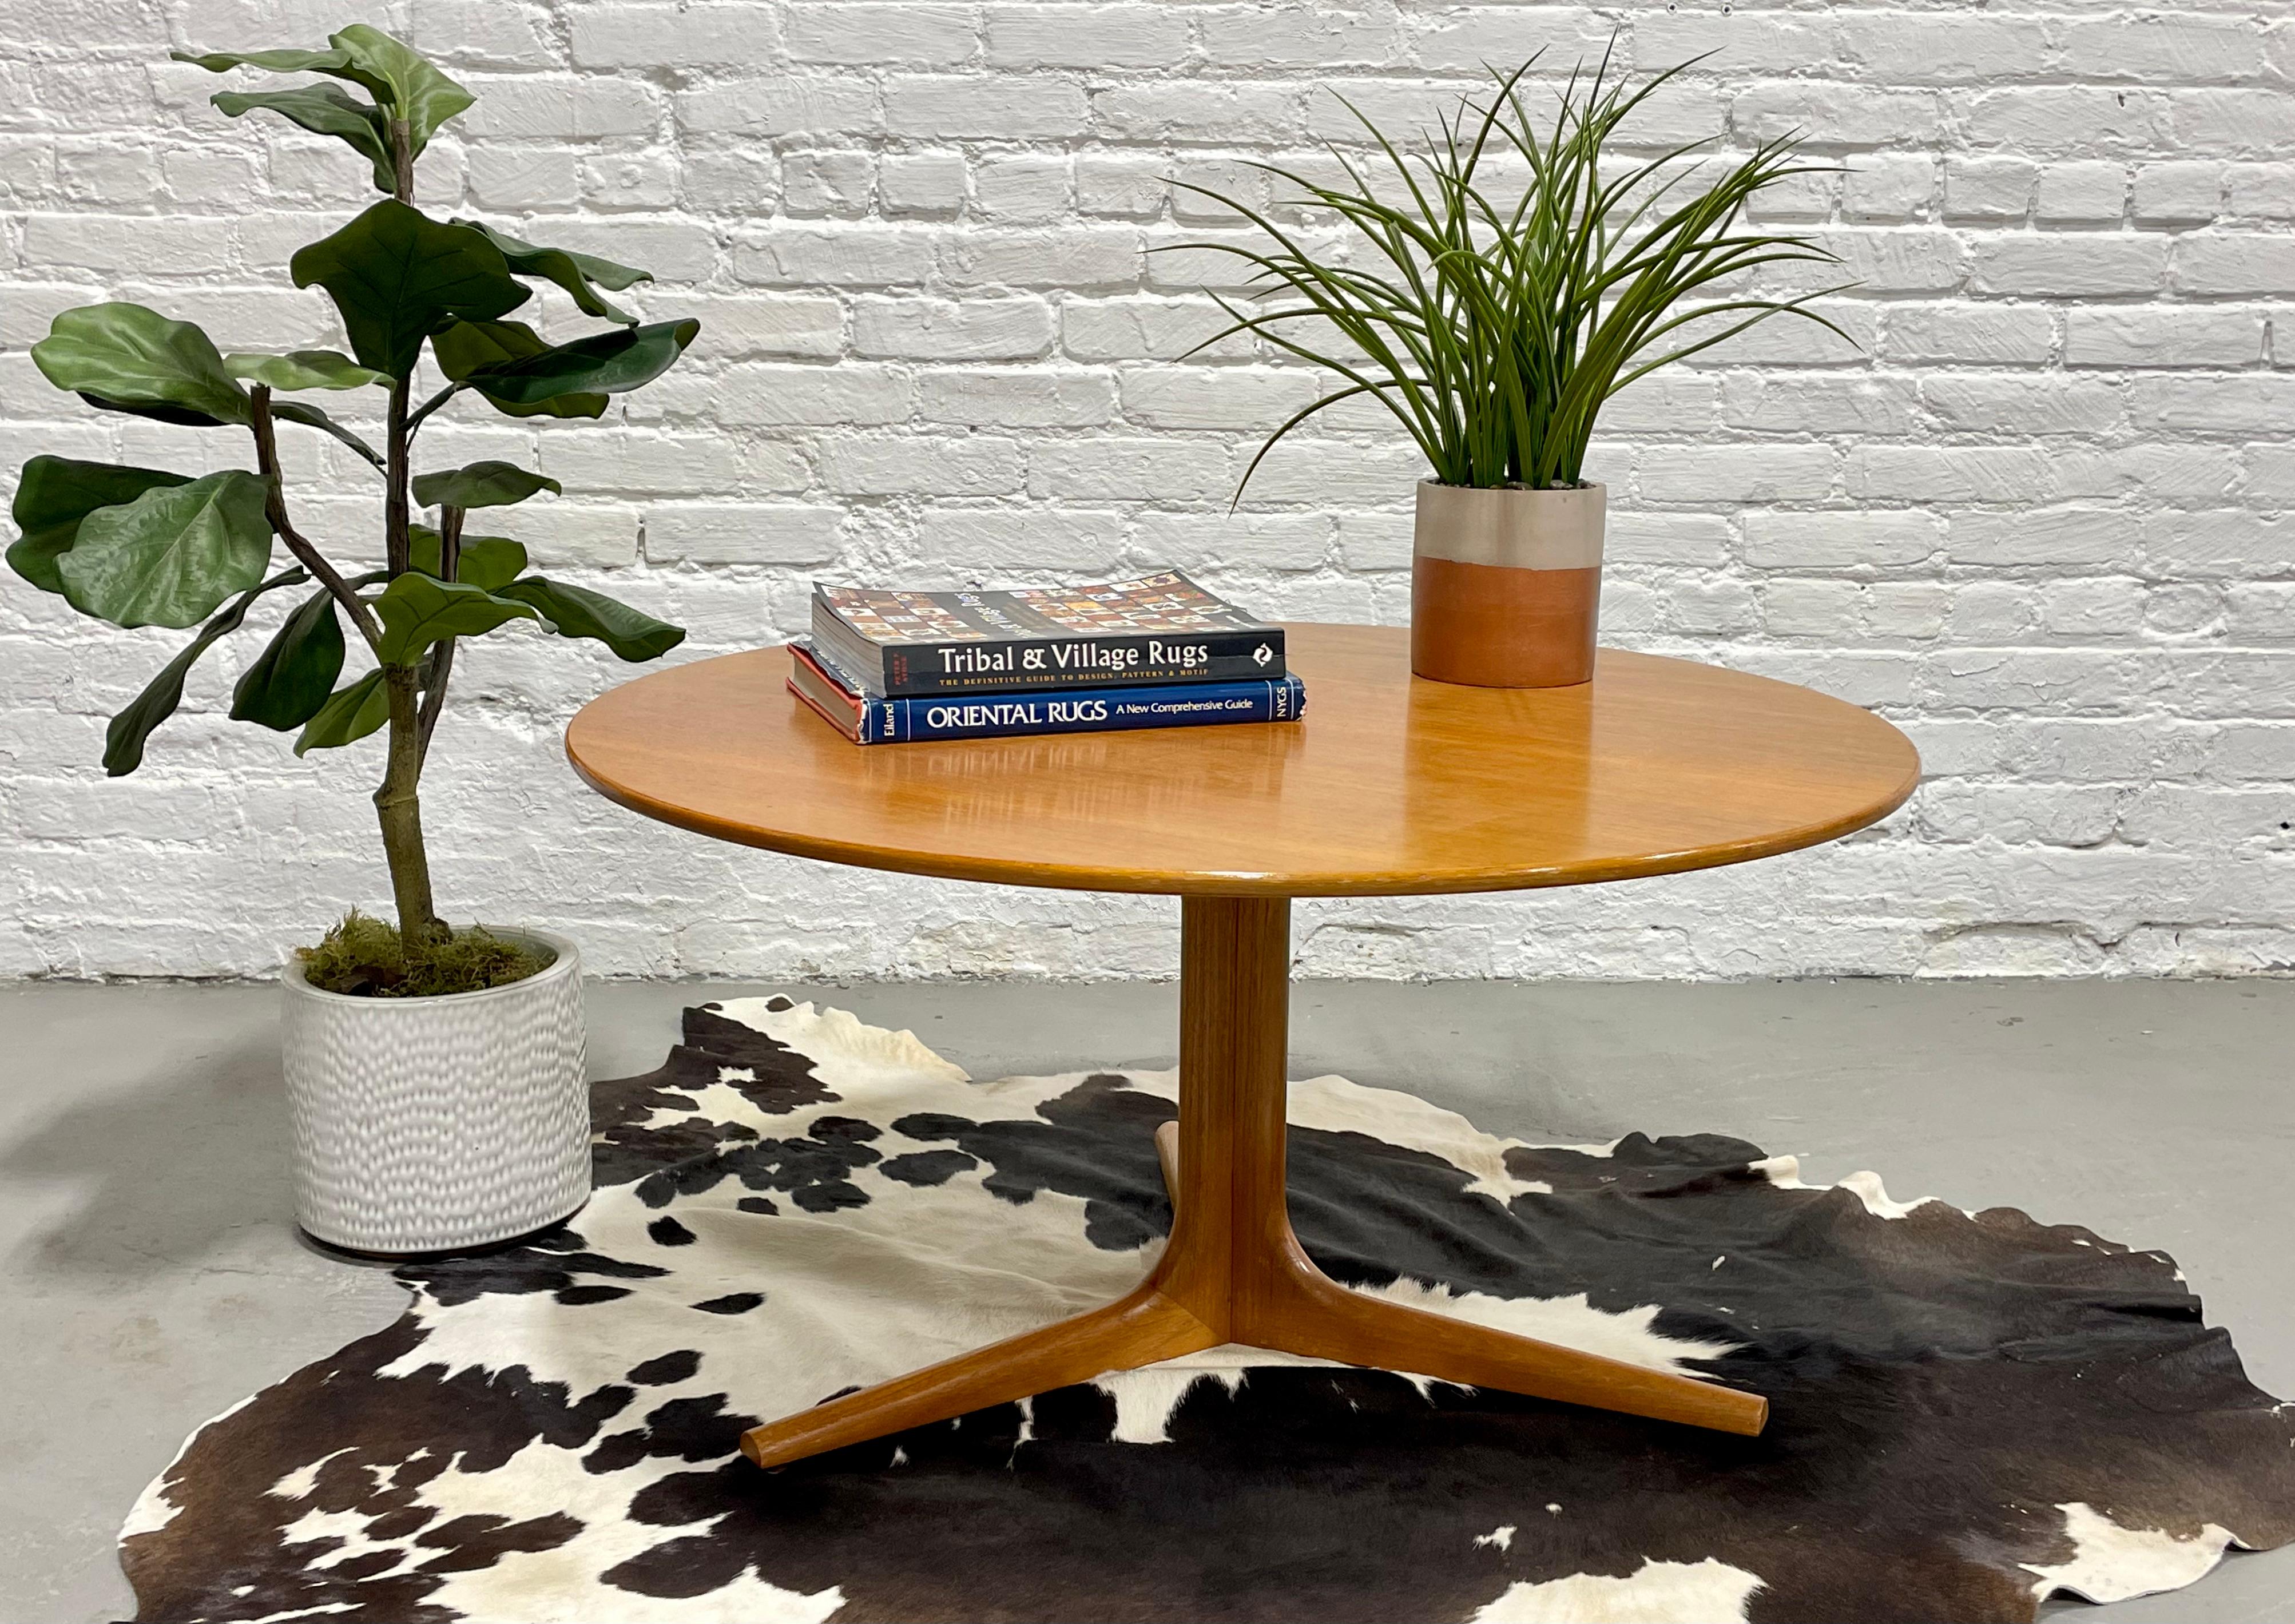 Teak Mid-Century Modern Danish round coffee table, circa 1960s. Solid + sturdy table with unique three legged base design. If you've been searching for a round mid century coffee table, you know they are not easy to find. This stunning table will